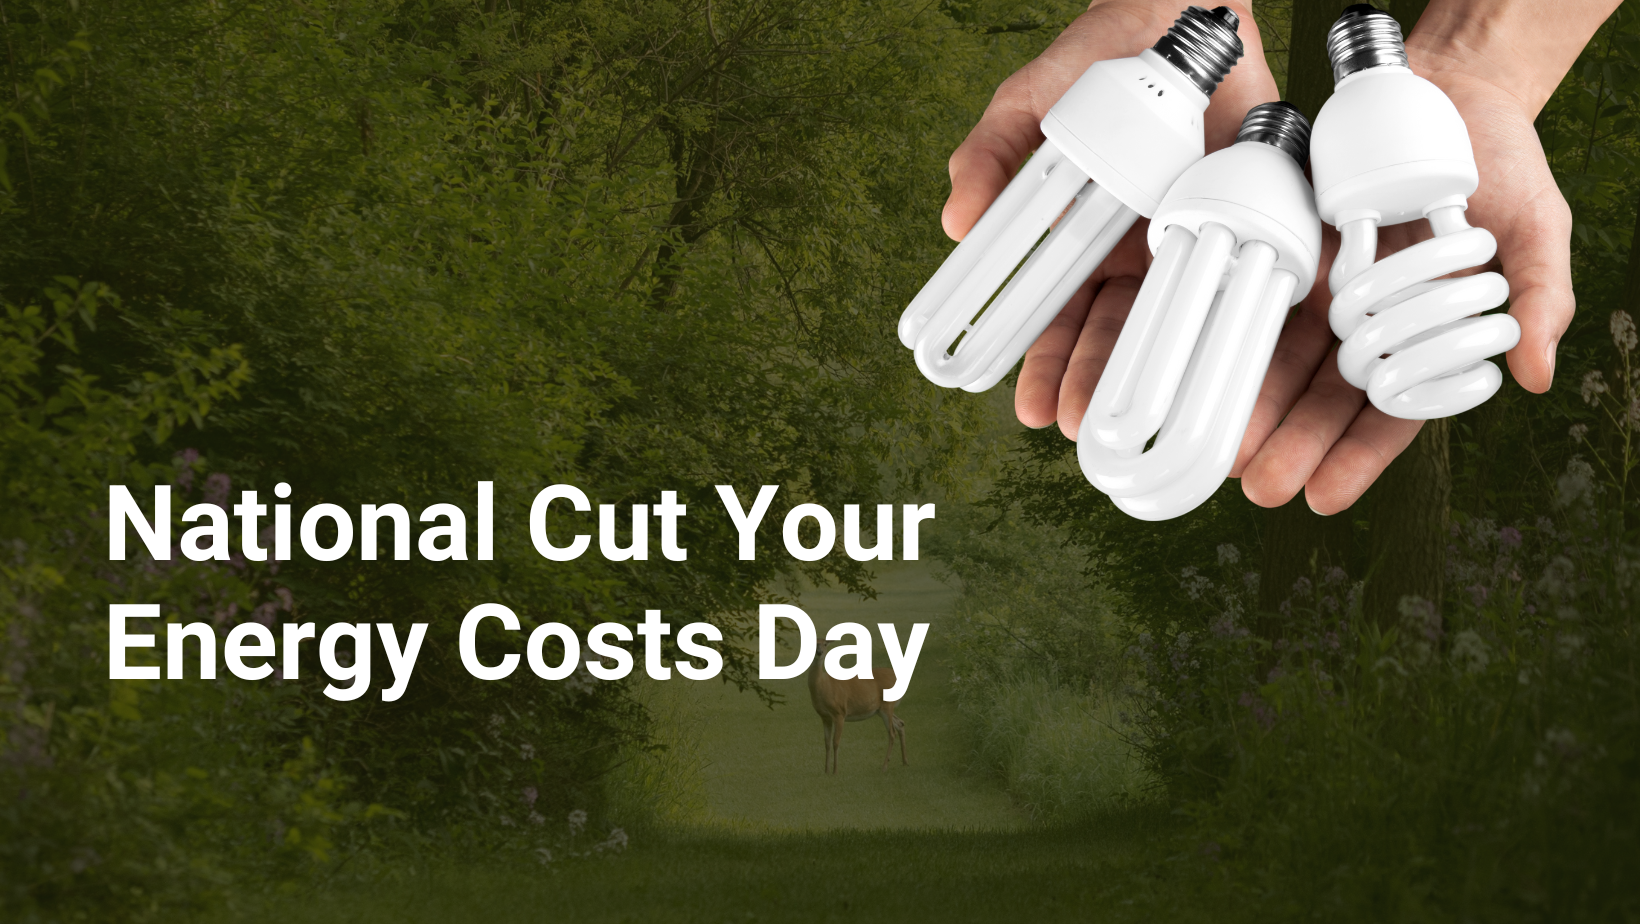 National Cut Your Energy Costs Day at the Virginia Tech Corporate Research Center